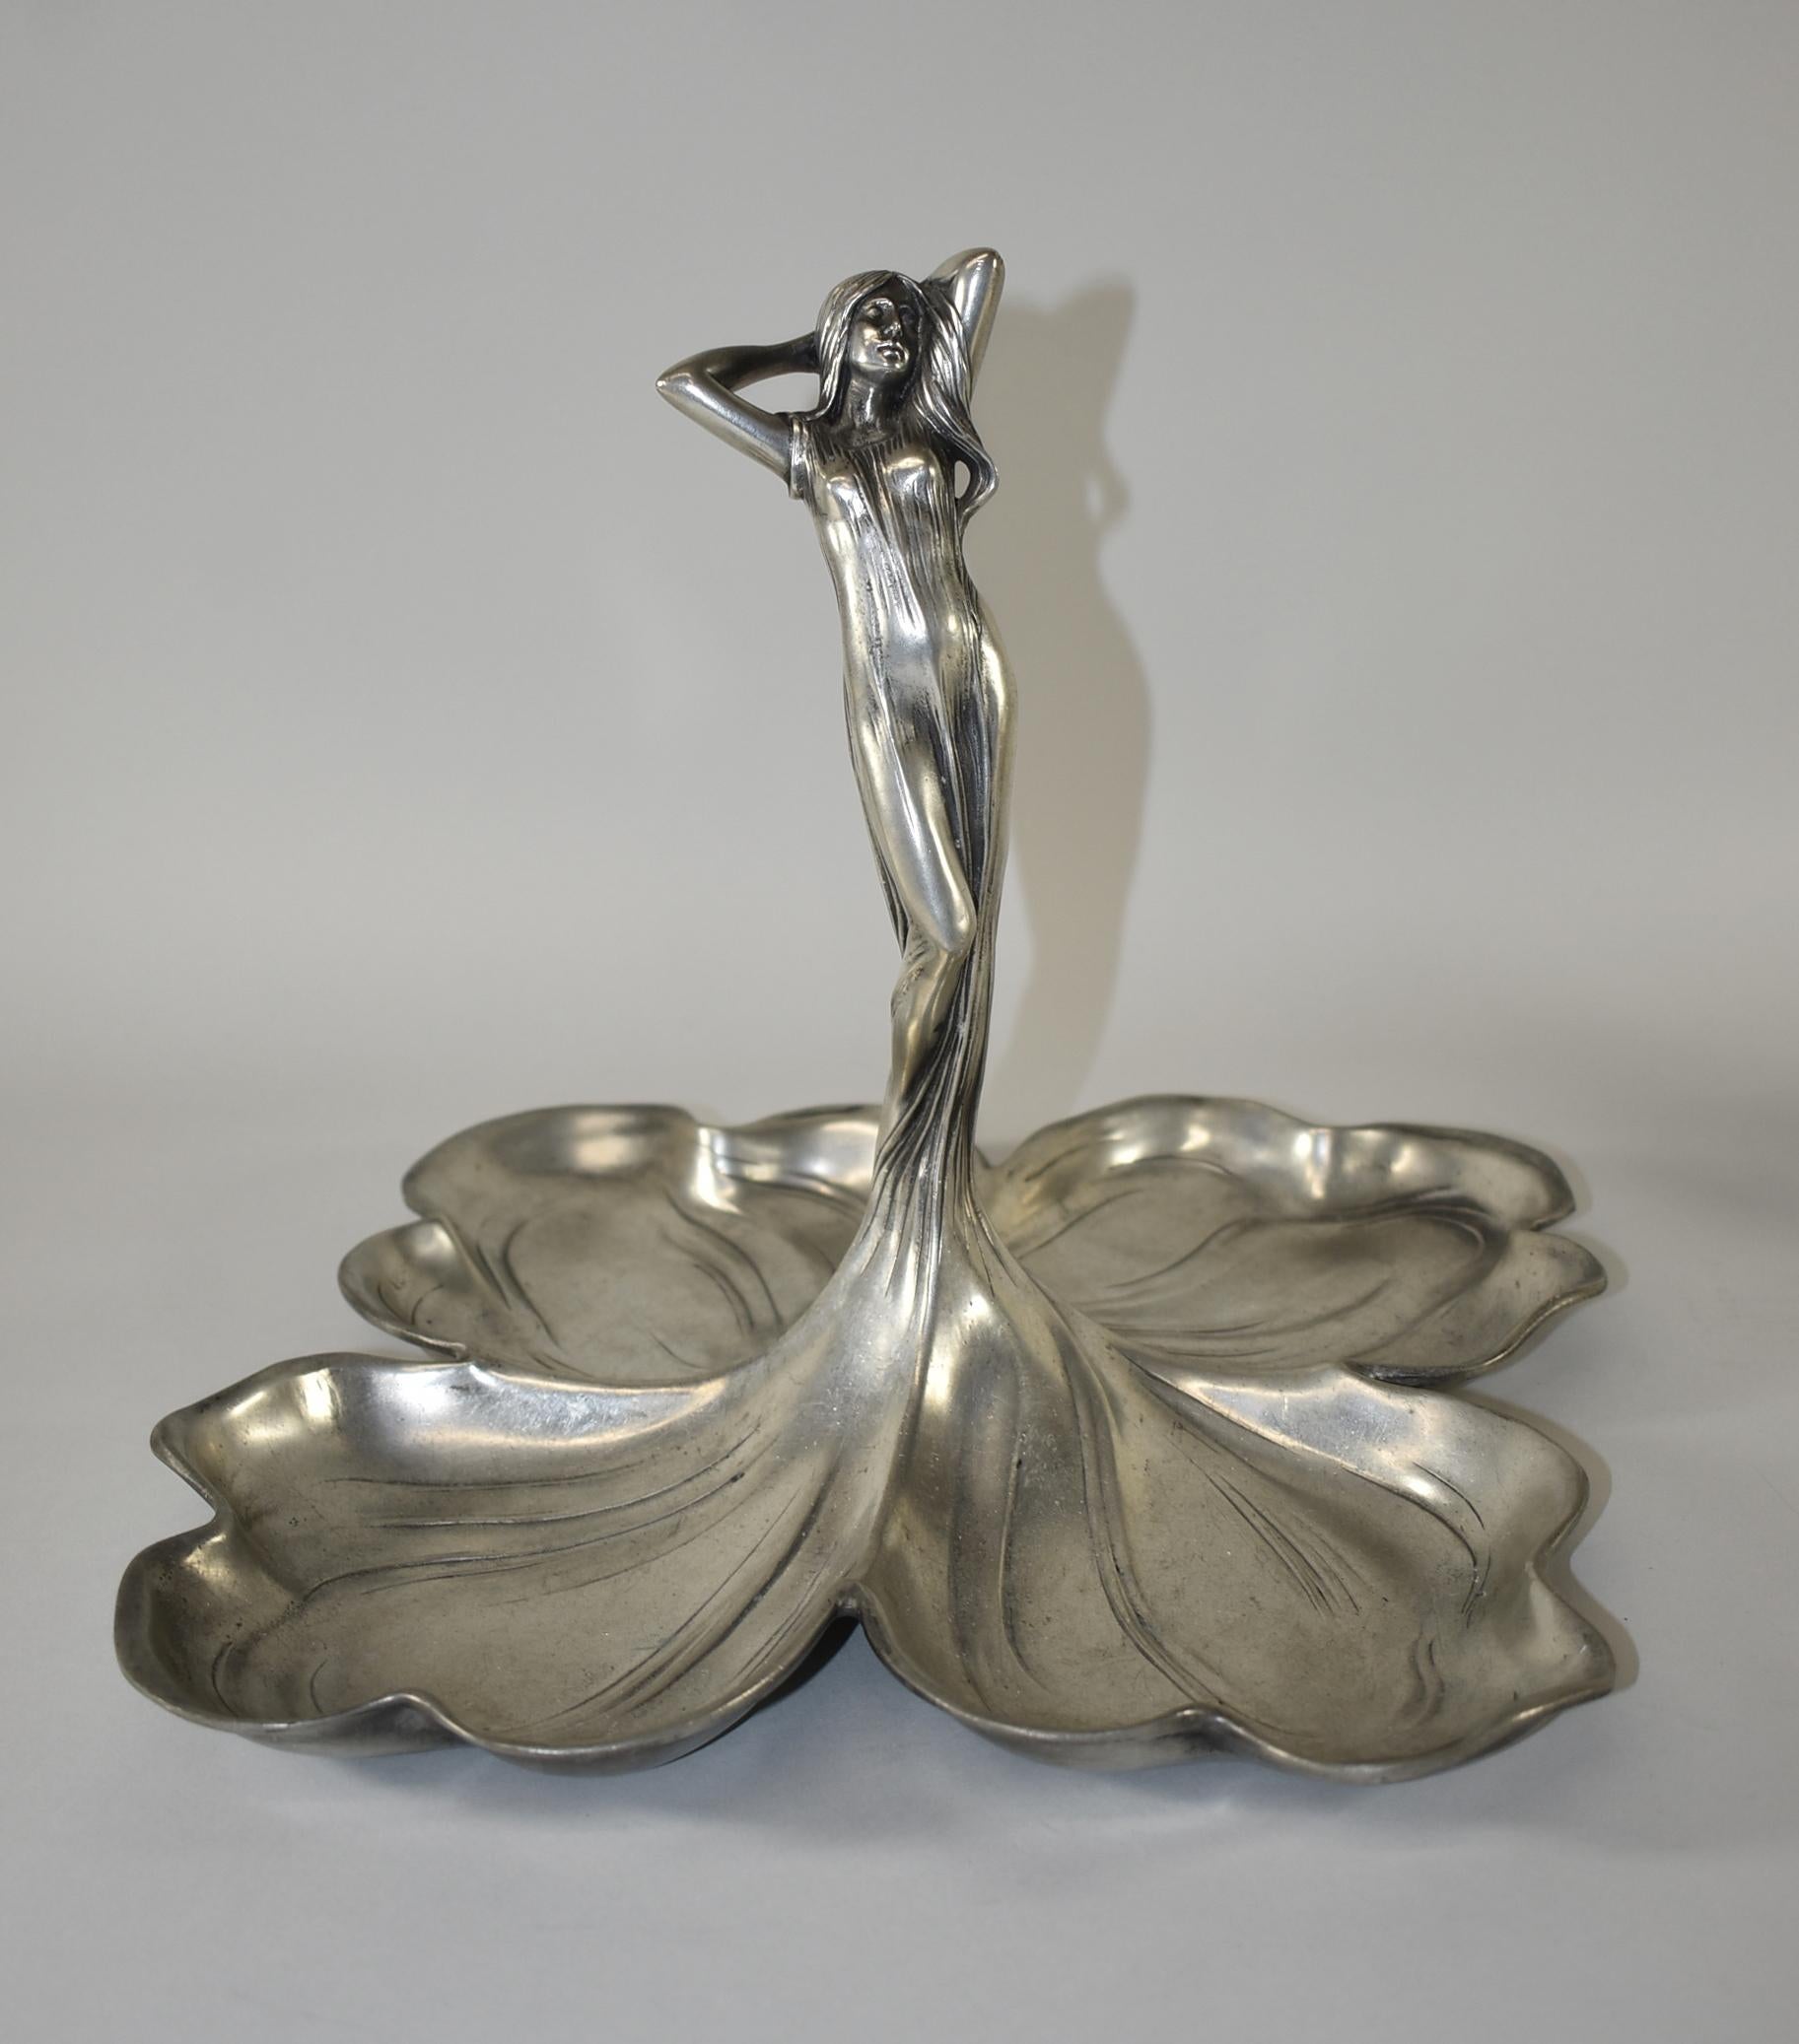 Art Nouveau pewter bowl / tray / fruit dish /centrepiece designed by Albert Mayer. It is an outstanding masterpiece with a figural young beauty with long flowing hair and dress that transforms into a quadruple leaf dish. The centrepiece quadruple